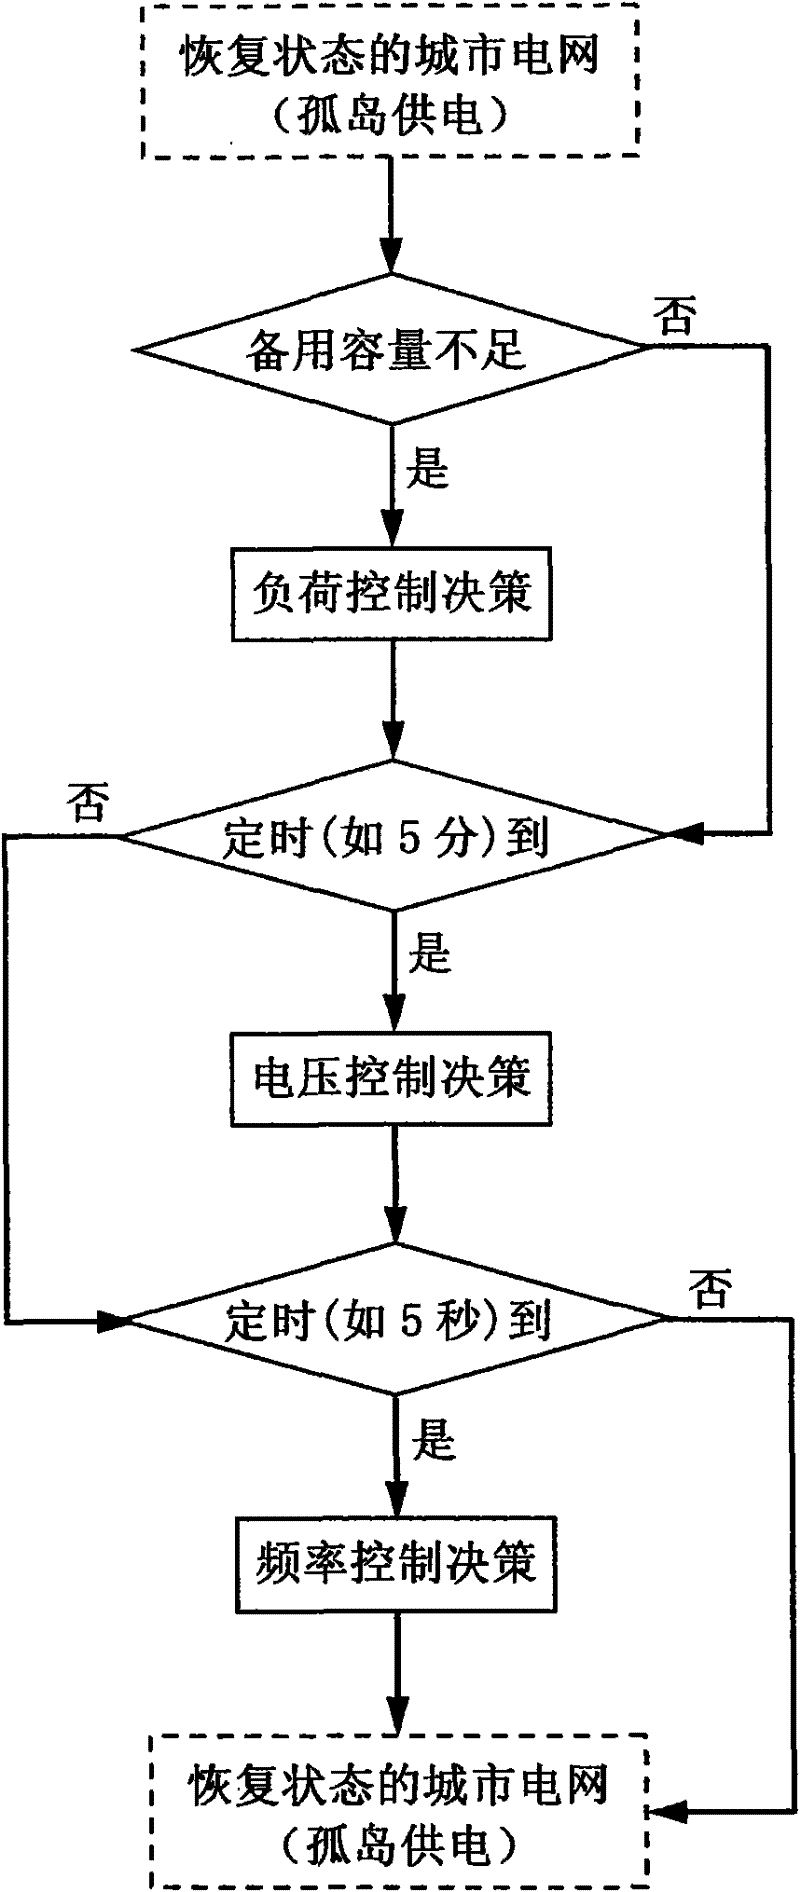 Self-healing control method for operation of urban distribution network